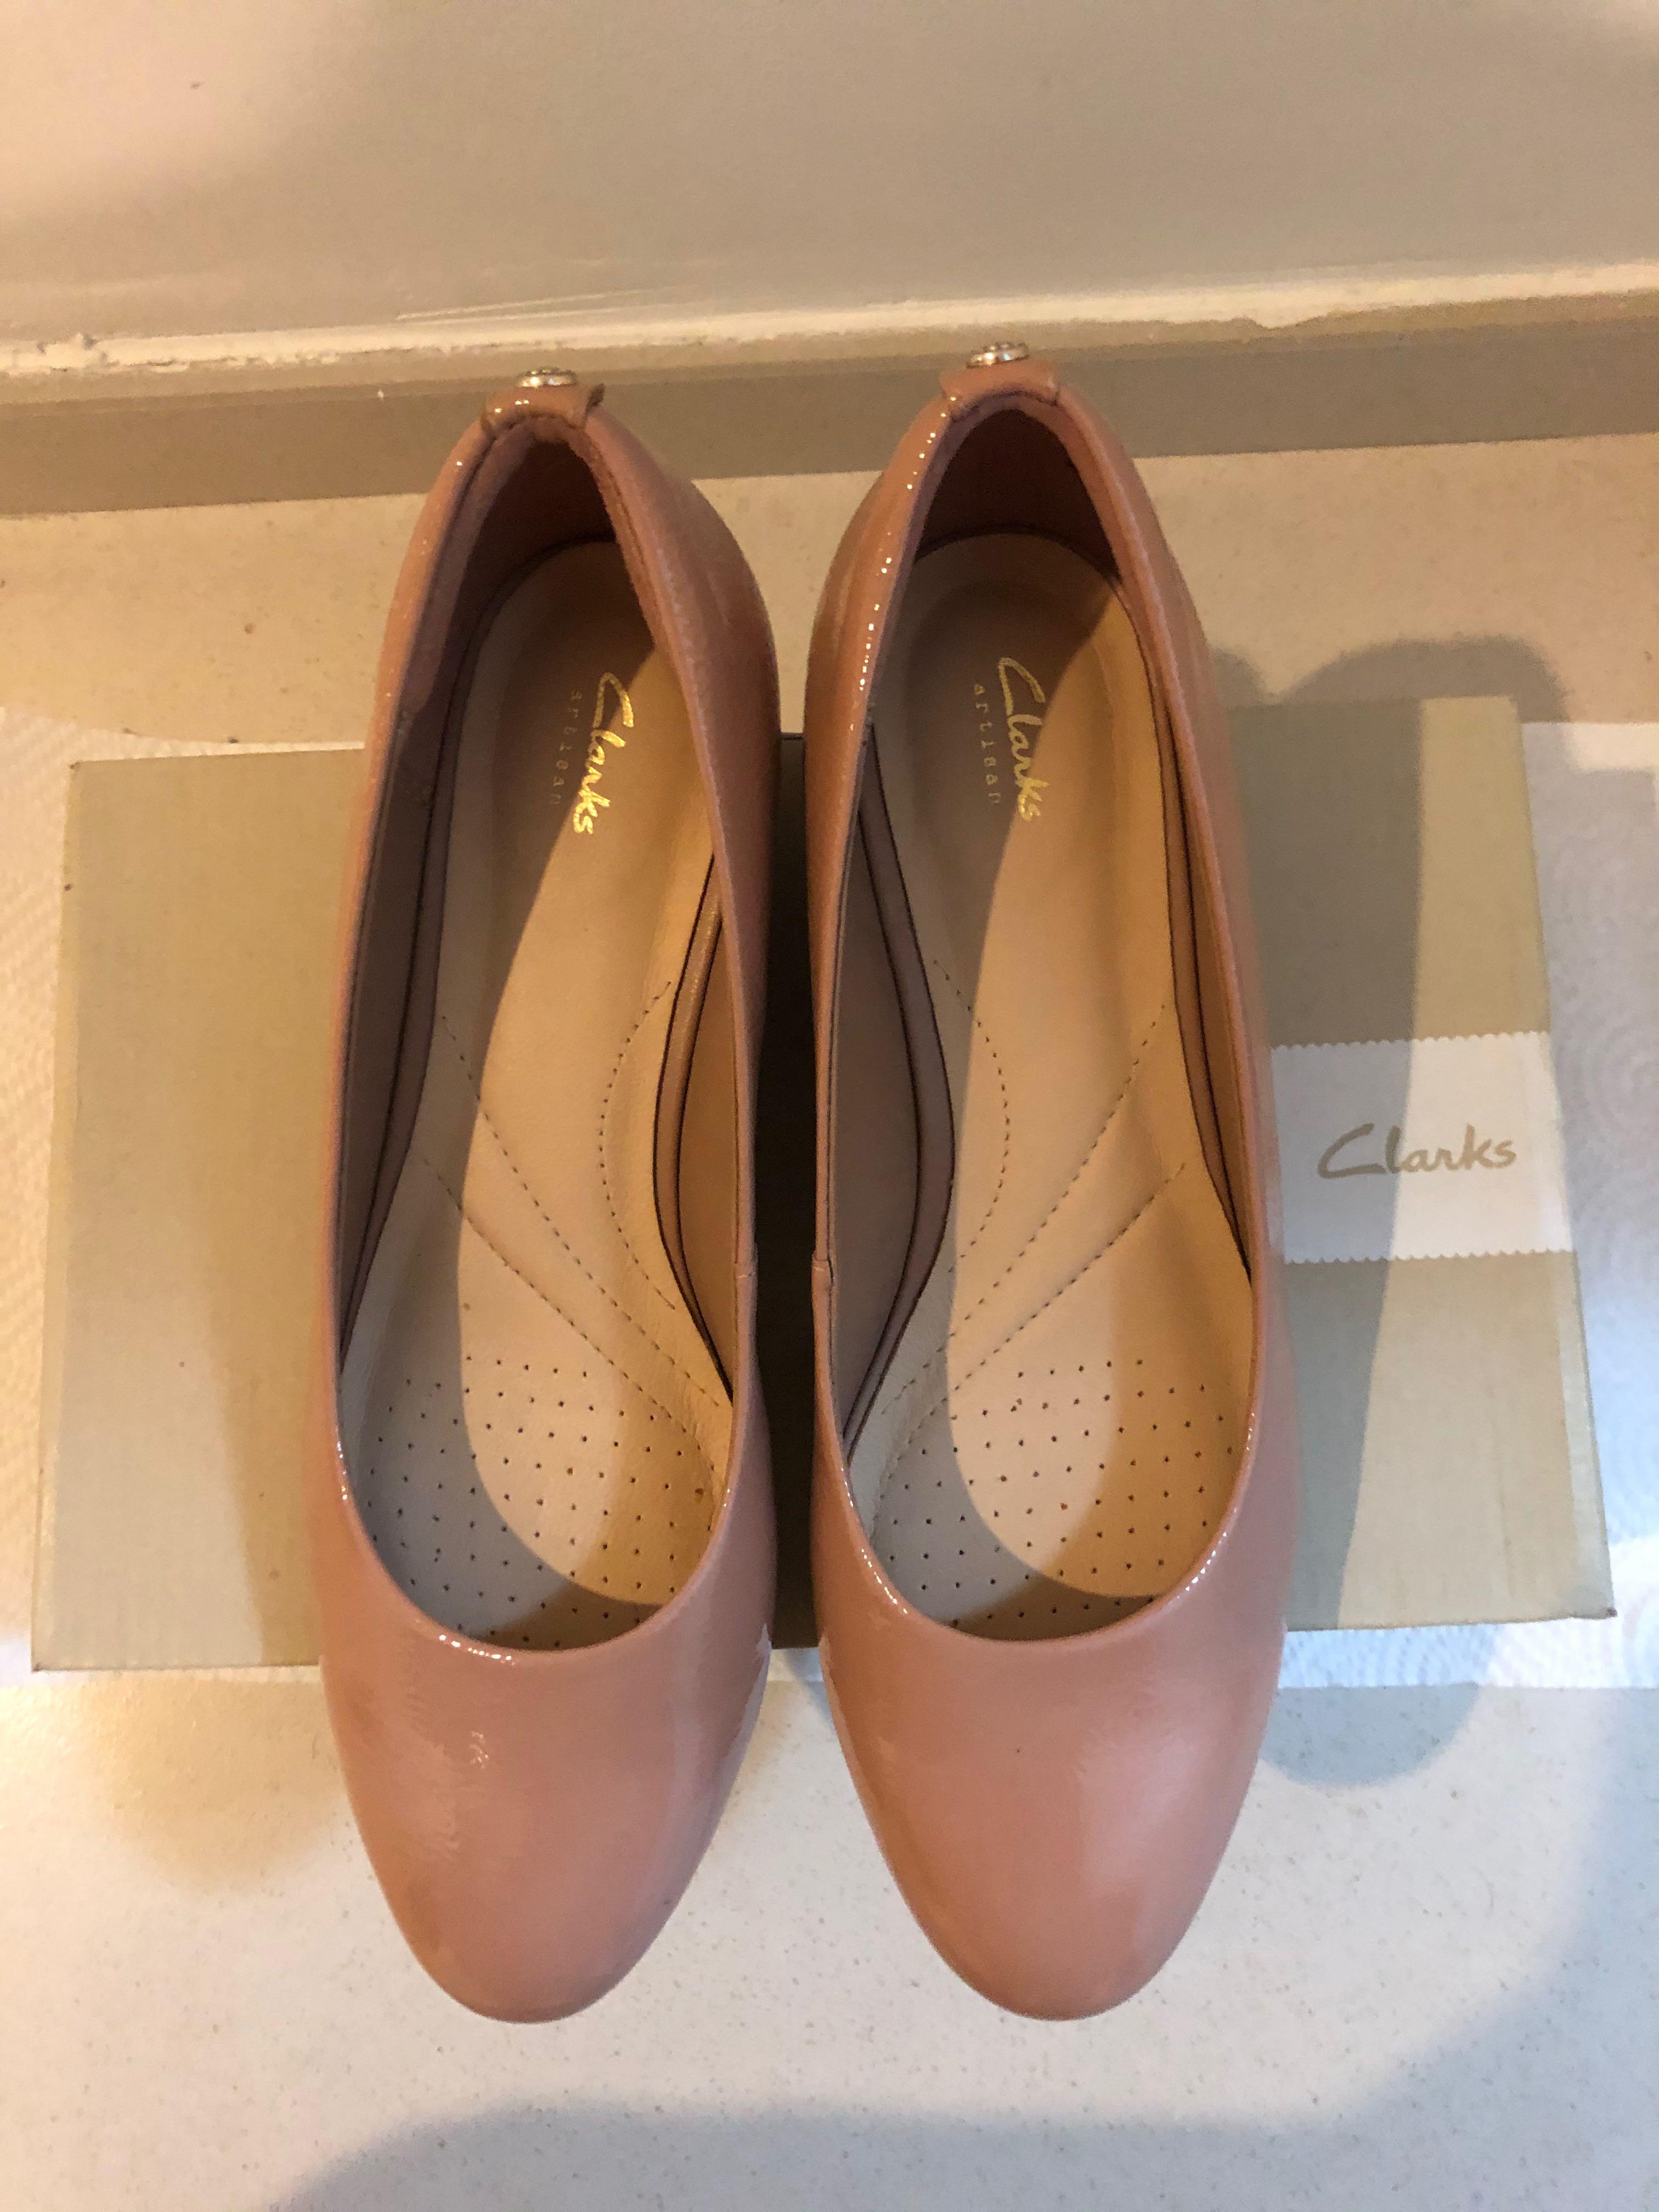 Clarks Shoes, Women's Fashion, Shoes, Flats & Sandals on Carousell